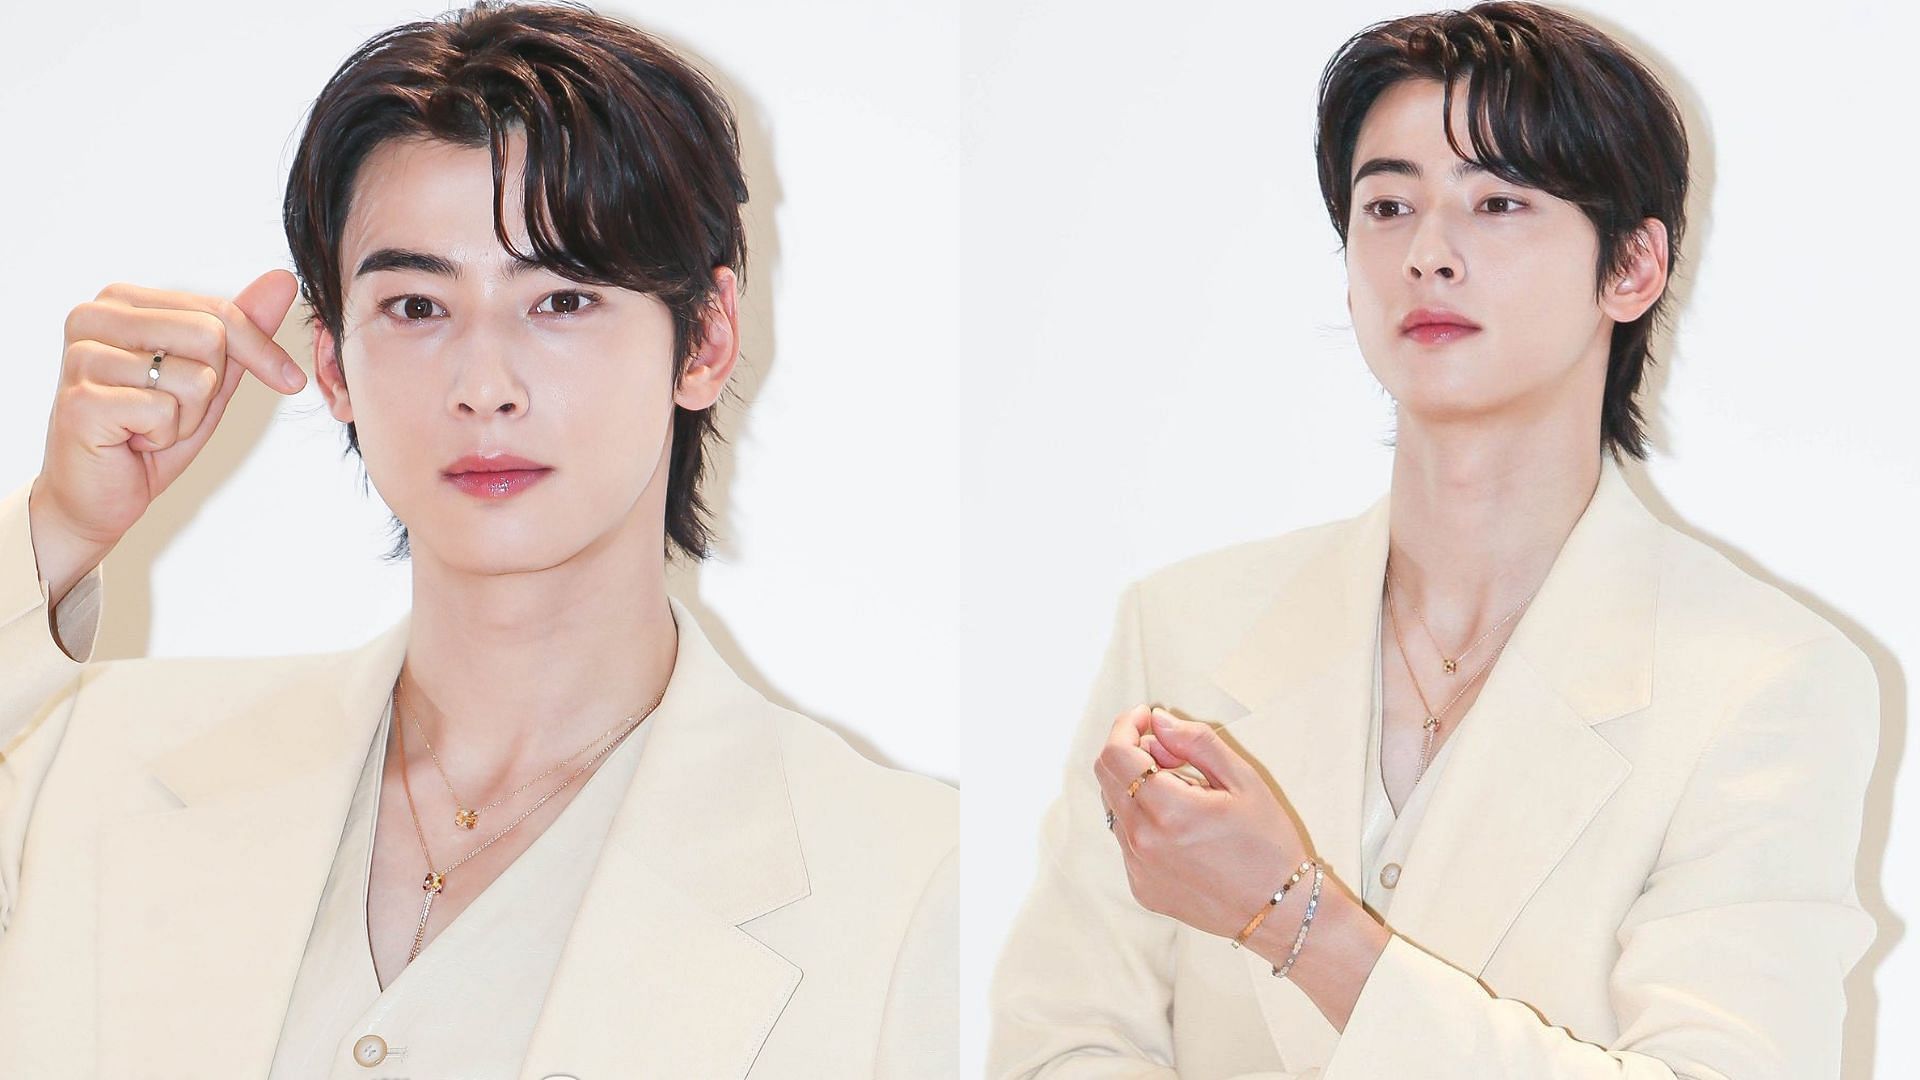 The Seoul Story on X: 📸 ASTRO Cha Eun Woo is the cover star of W Korea's  November issue where he teams up with jewelry brand Chaumet ✨ Source:    /